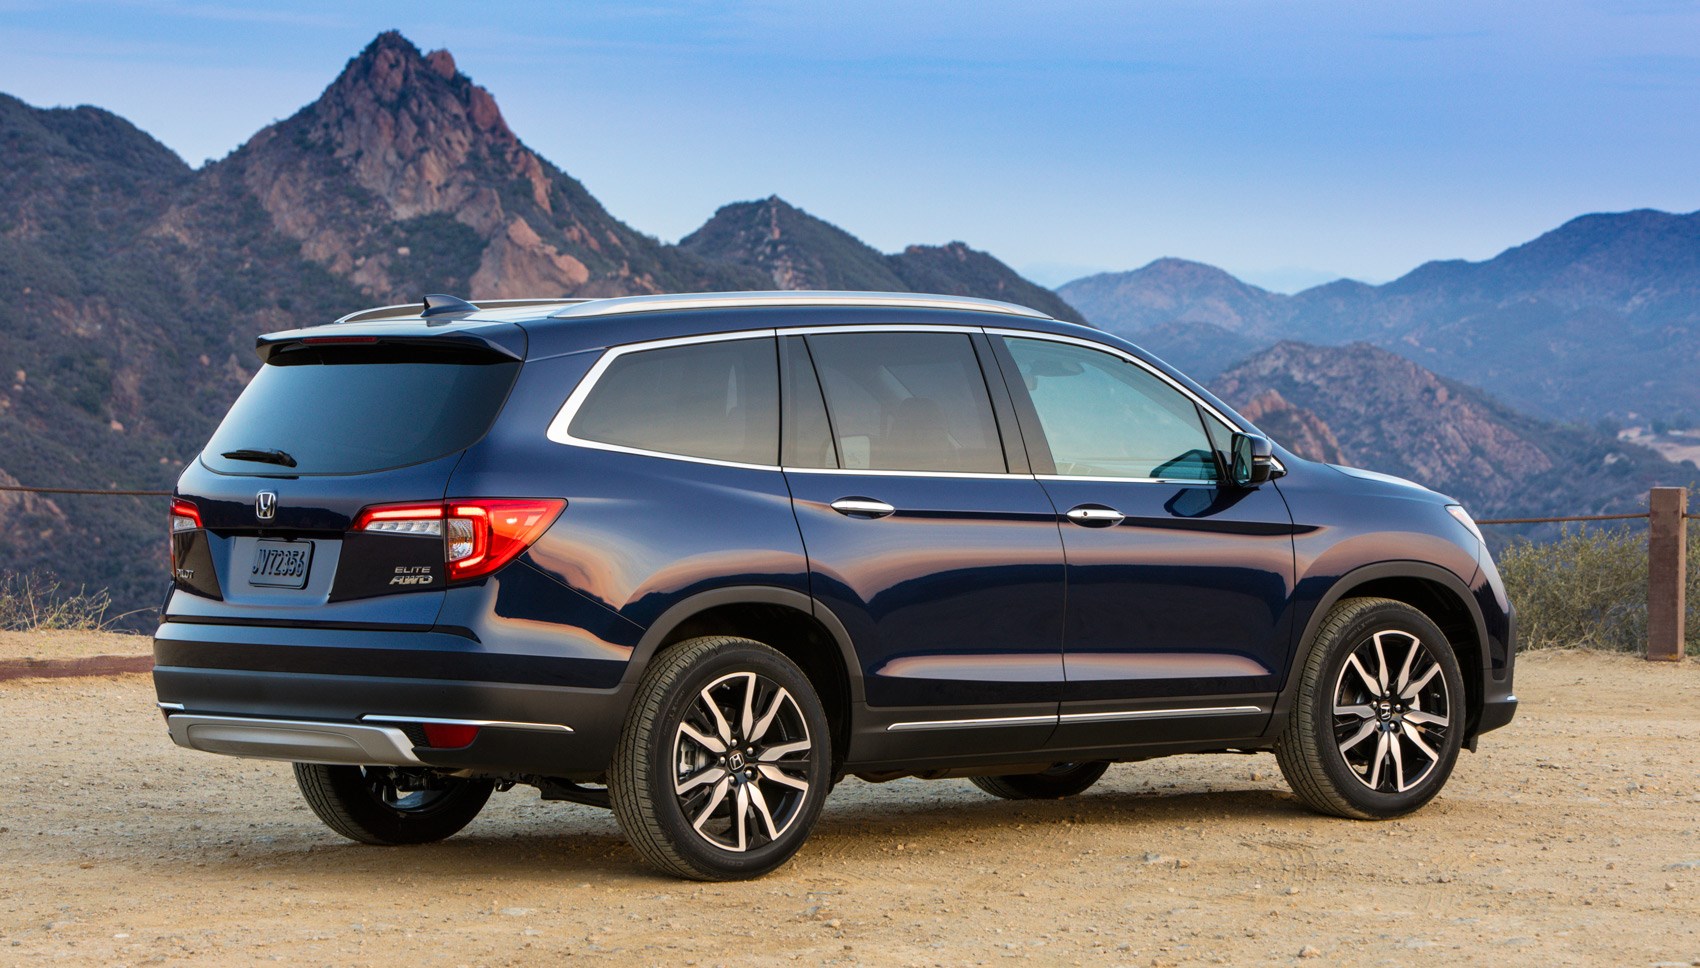 Honda Pilot (2018) review: large and in charge? | CAR Magazine